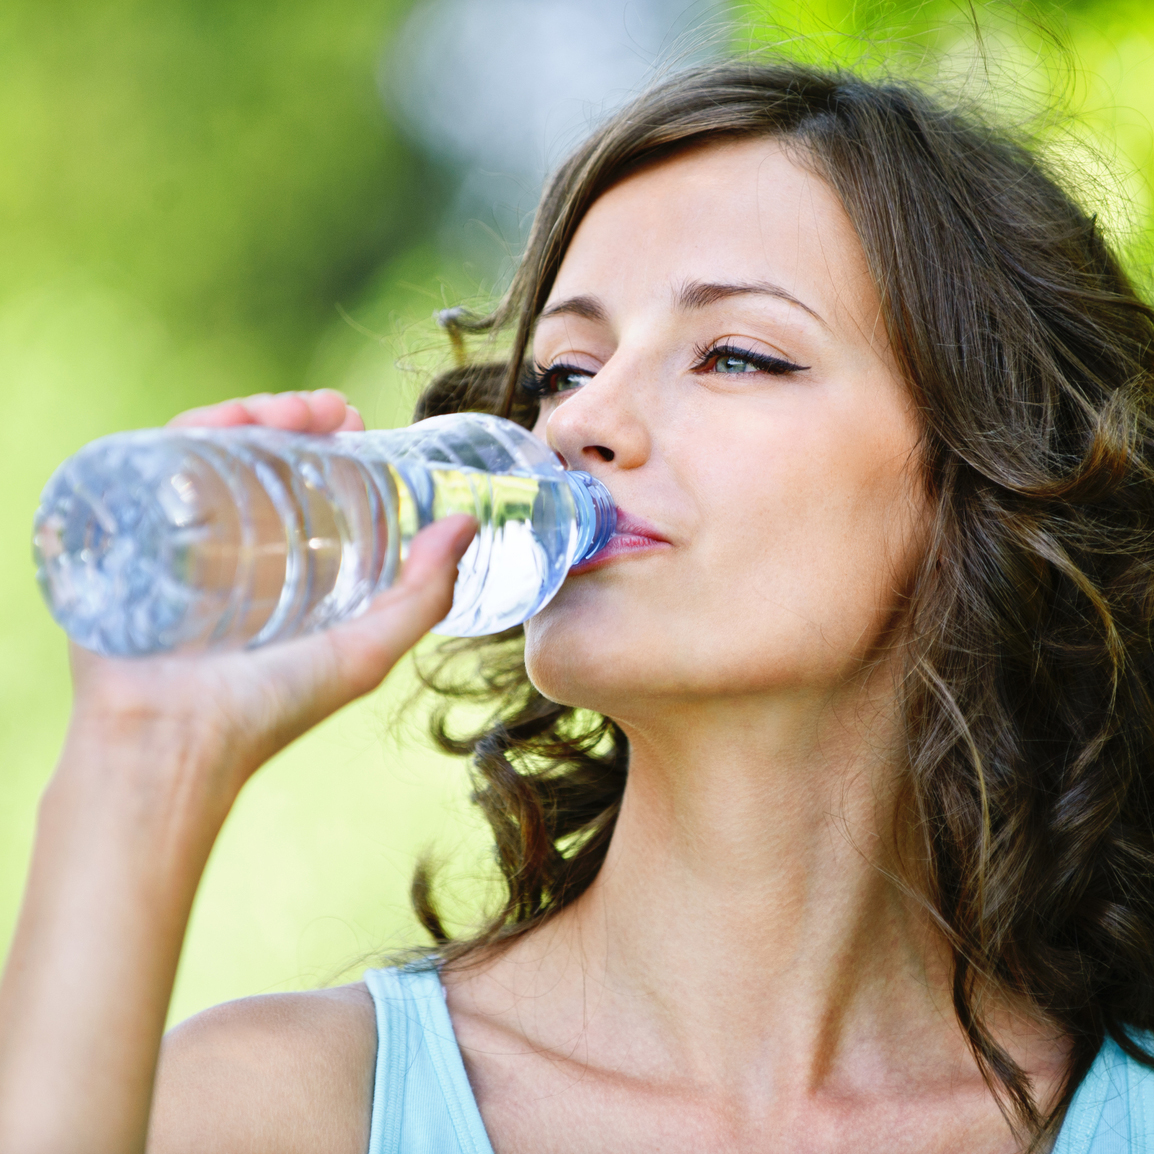 Portrait of young beautiful dark-haired woman wearing blue t-shirt drinking water at summer green park.